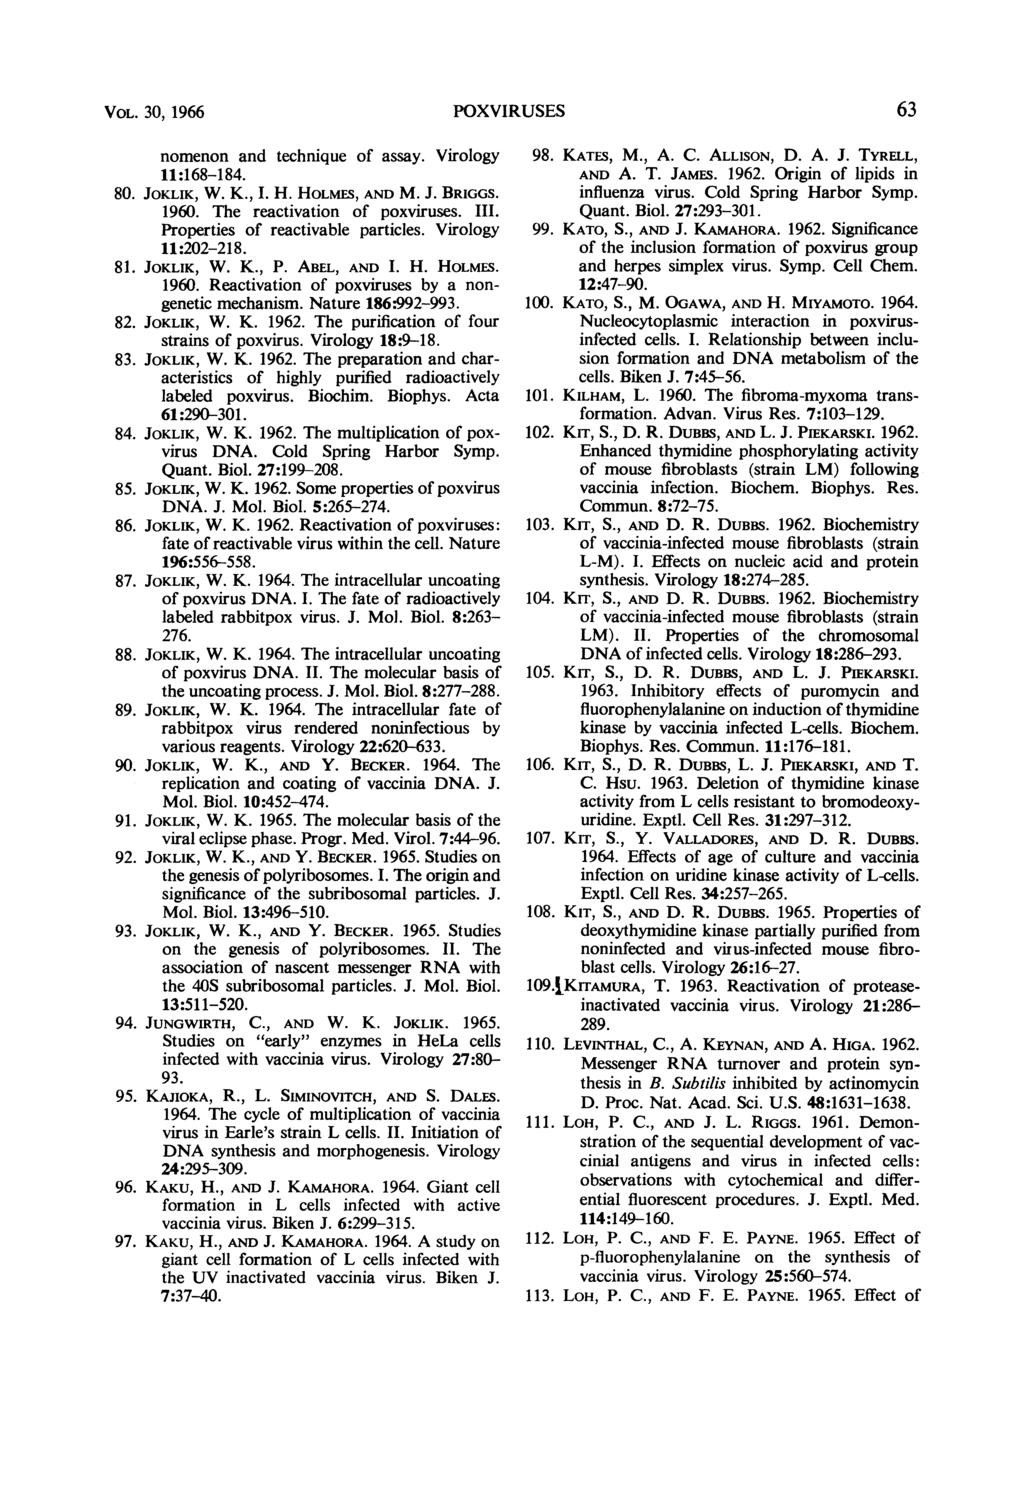 VOL. 30, 1966 POXVIRUSES 63 nomenon and technique of assay. Virology 11:168-184. 80. JOKLIK, W. K., I. H. HOLMES, AND M. J. BRIGGS. 1960. The reactivation of poxviruses. III.